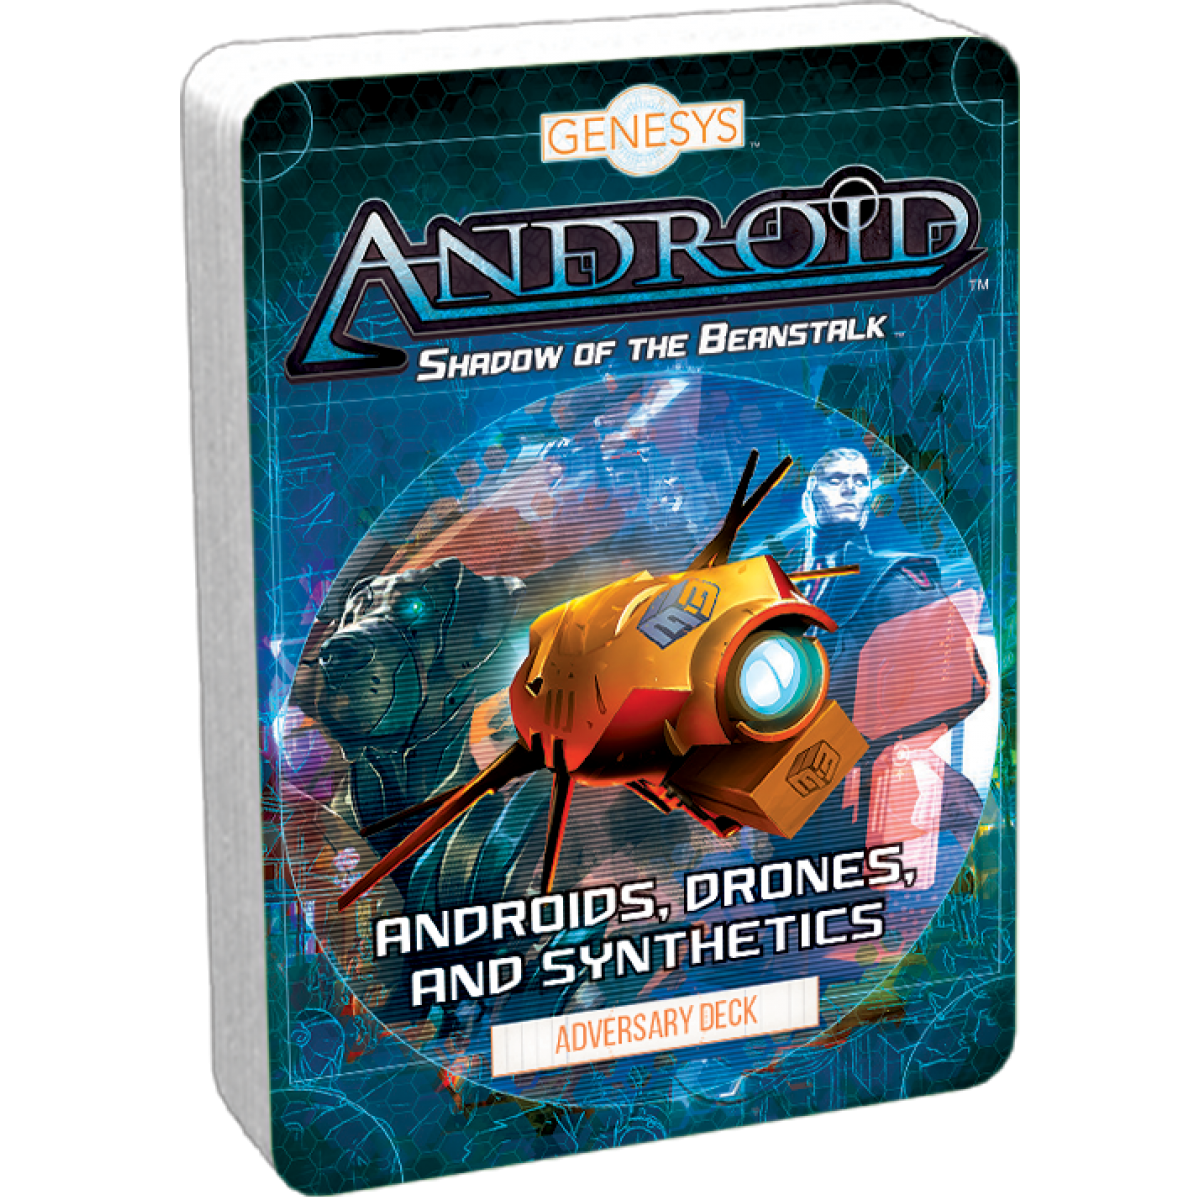 Android Genesys Androids Drones And Synthetics Adversary Deck